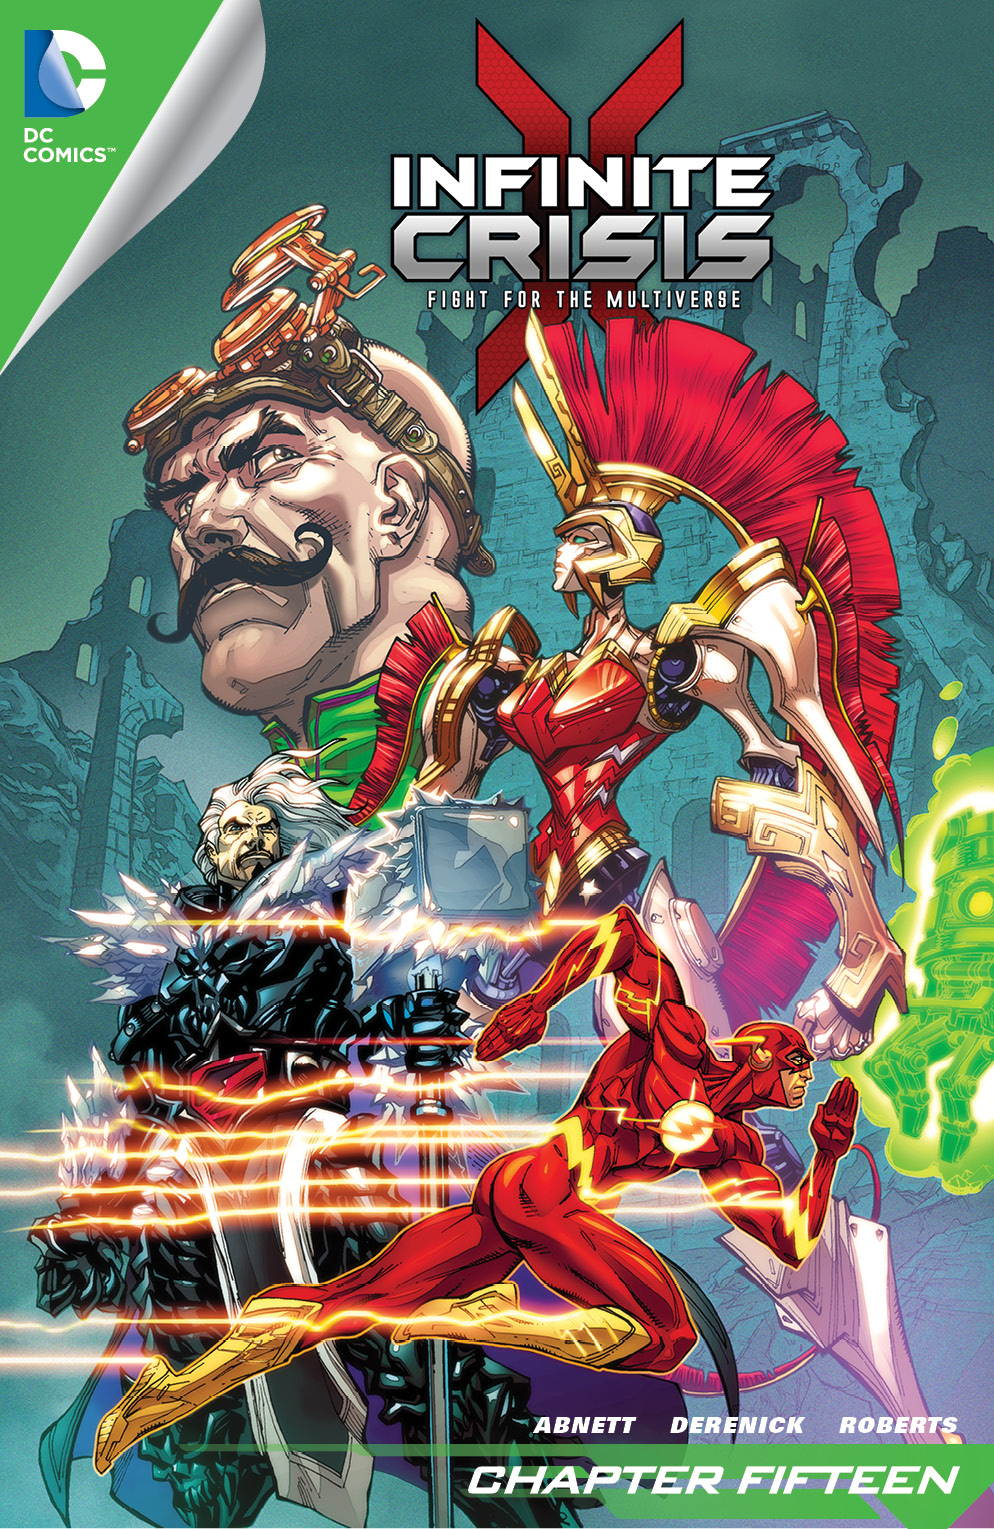 Infinite Crisis: Fight for the Multiverse #15 preview images